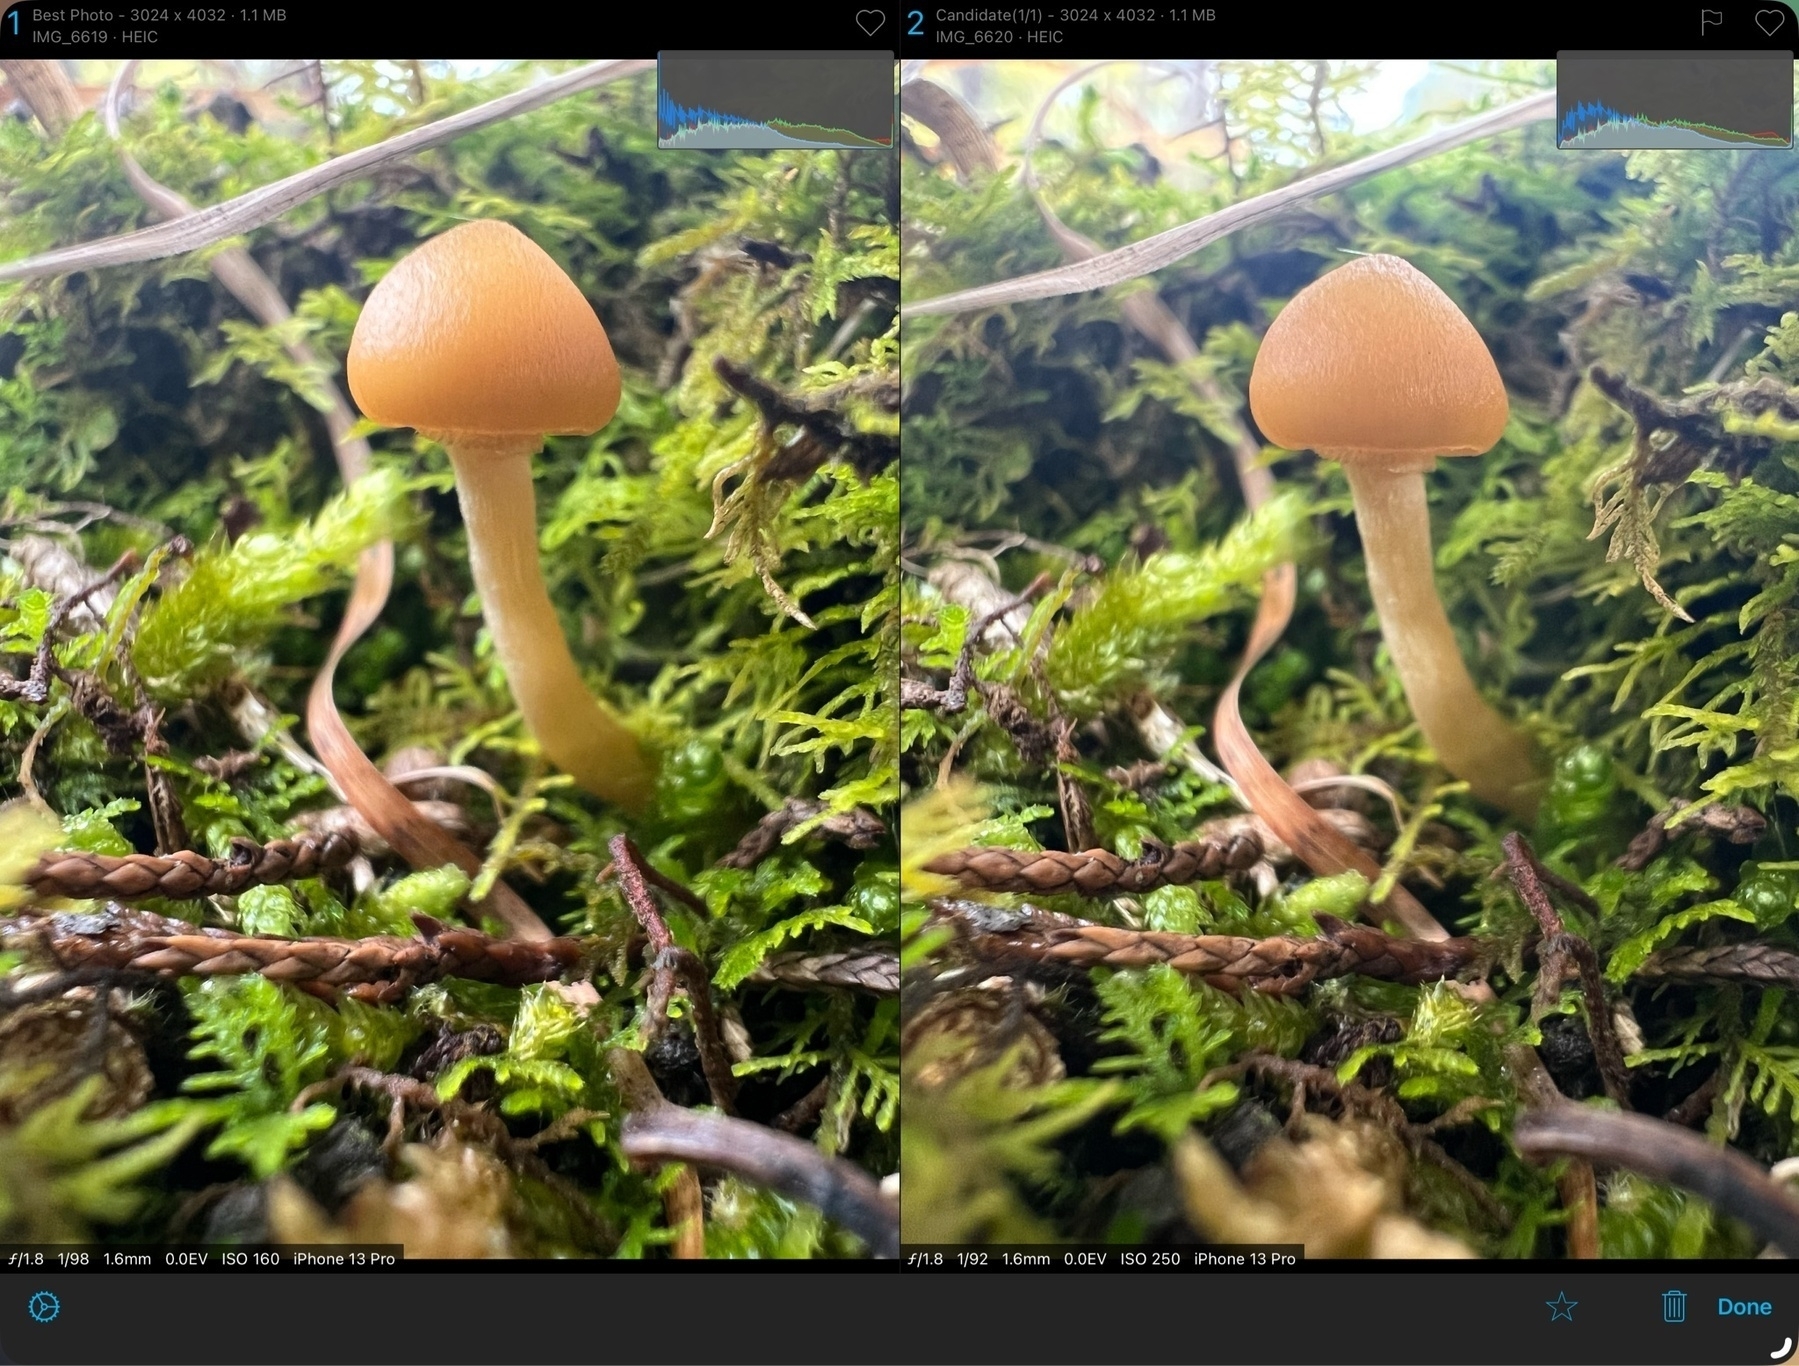 A screenshot showing an app window which shows the user two nearly identical images side by side for the purpose choosing the better image. In the particular example the photos are of a small mushroom in moss.